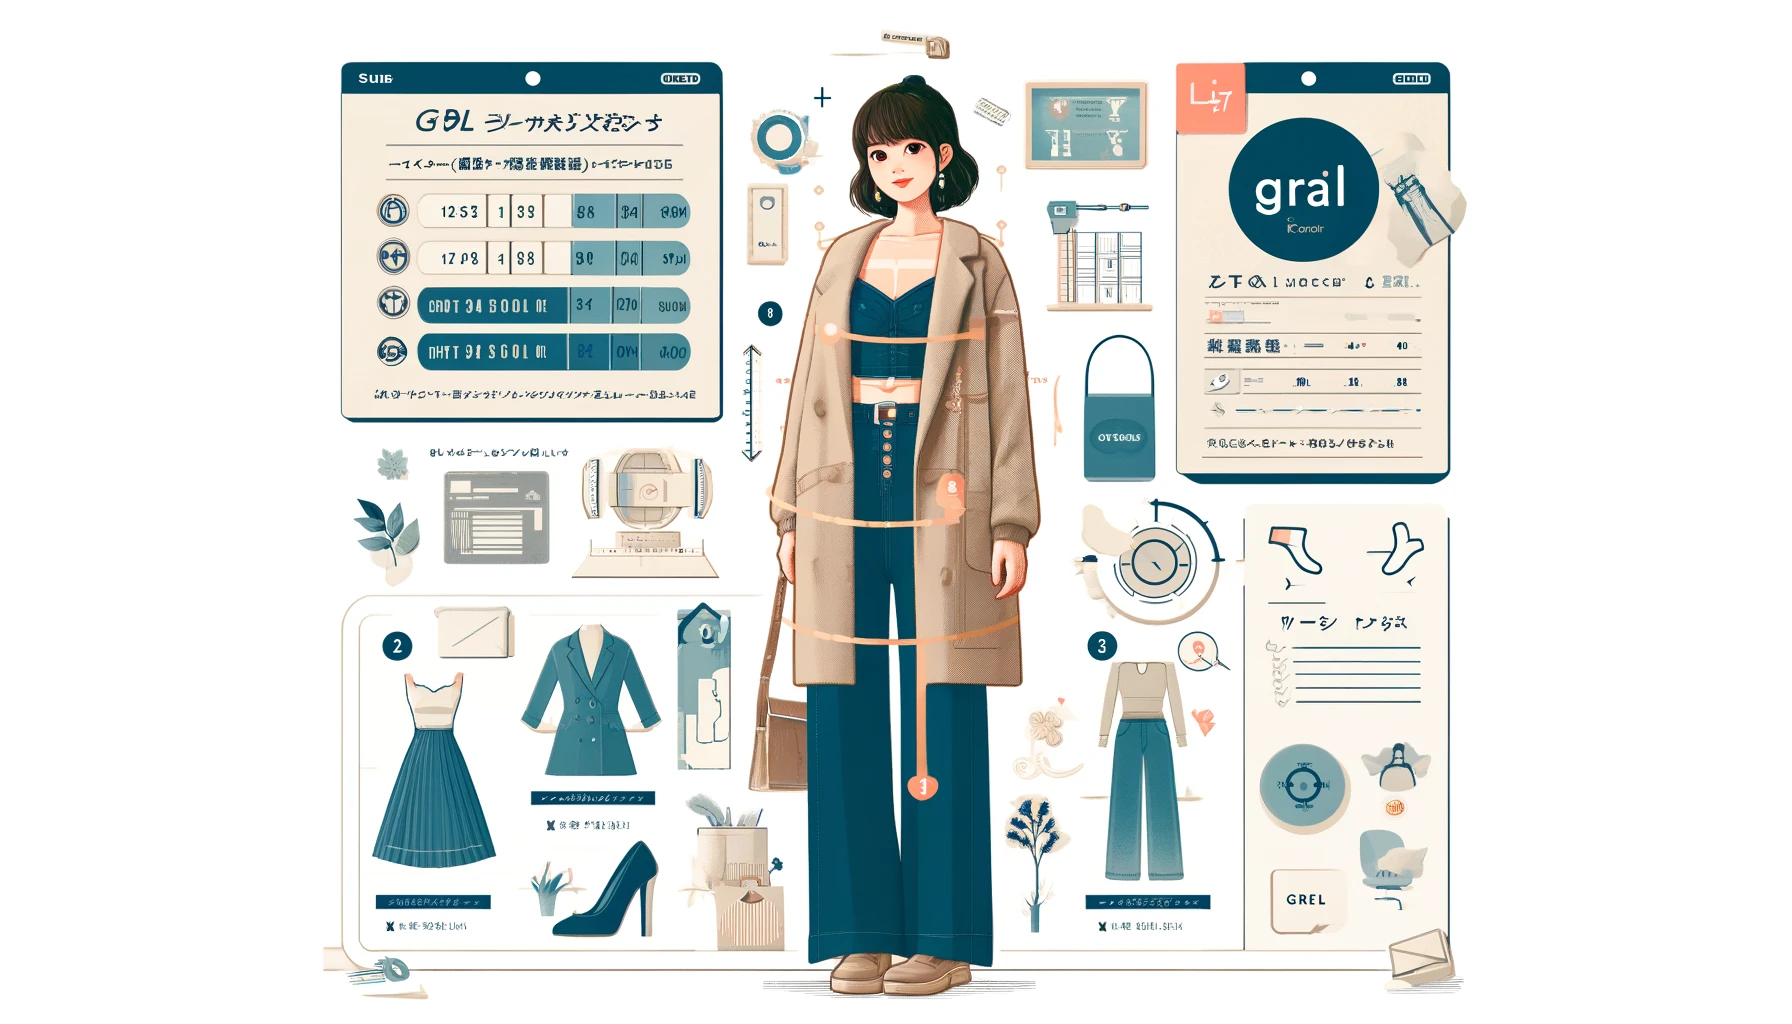 An image showing tips for choosing sizes for GRL (Grail), a budget-friendly women's fashion brand. The image includes a stylish Japanese woman with various size charts, measurement tips, and advice on selecting the right size. The background is modern with fashion-related icons and design elements.